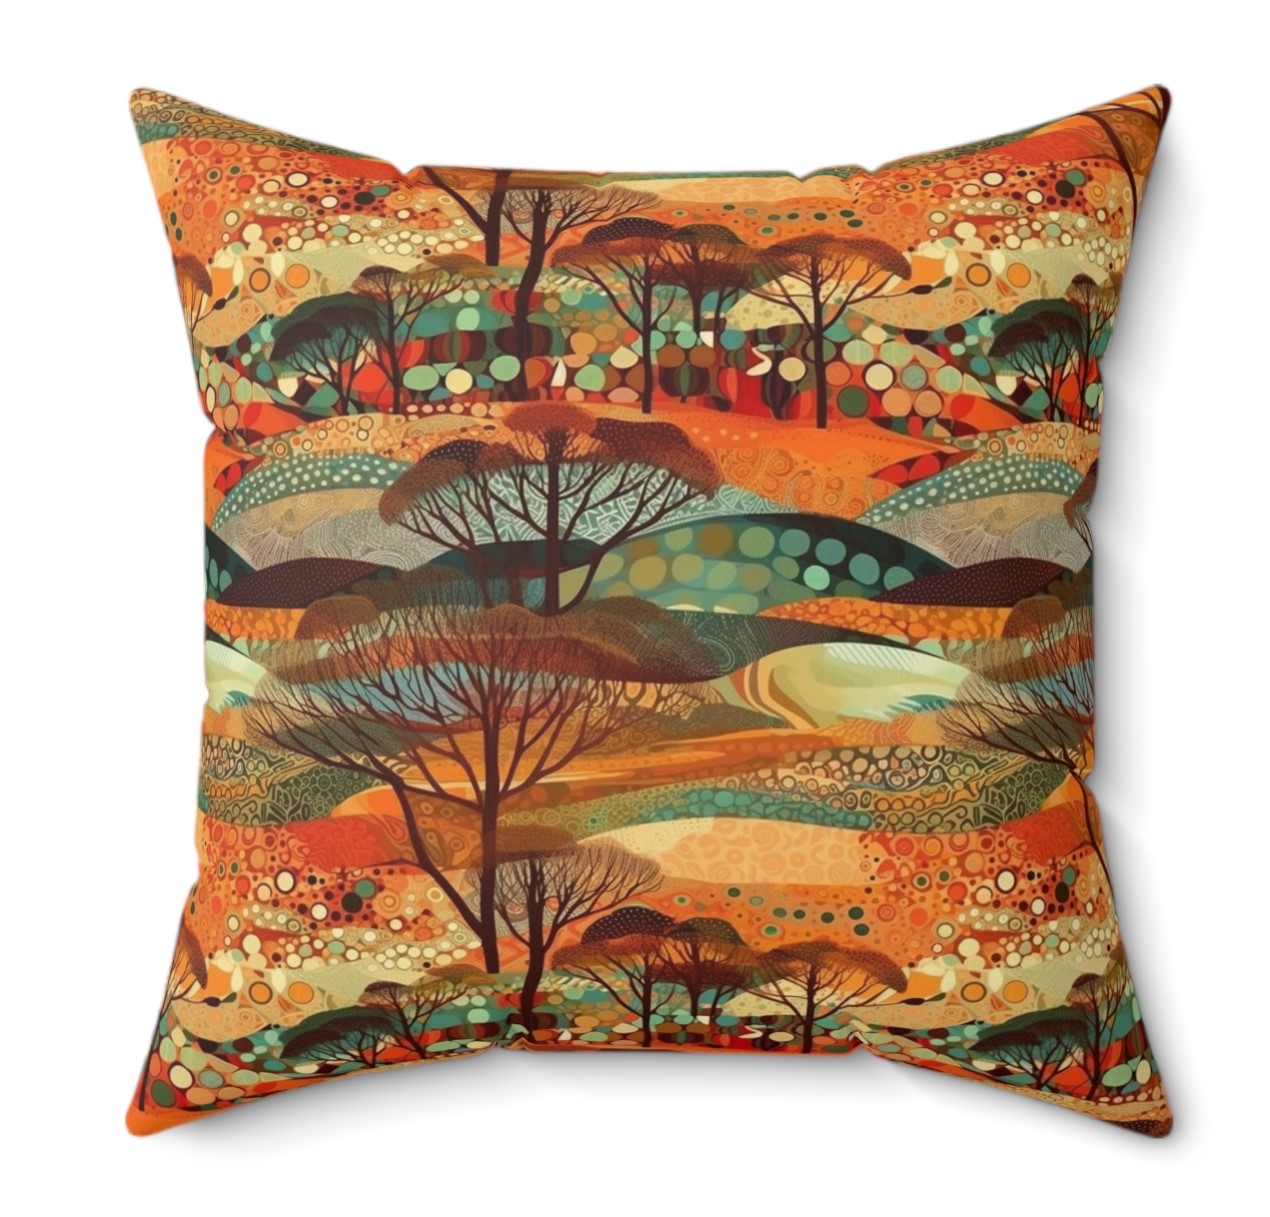 Close-up of the Vibrant Ugandan Landscape Pillow, highlighting the stunning details of the Ugandan landscape and vibrant colors.